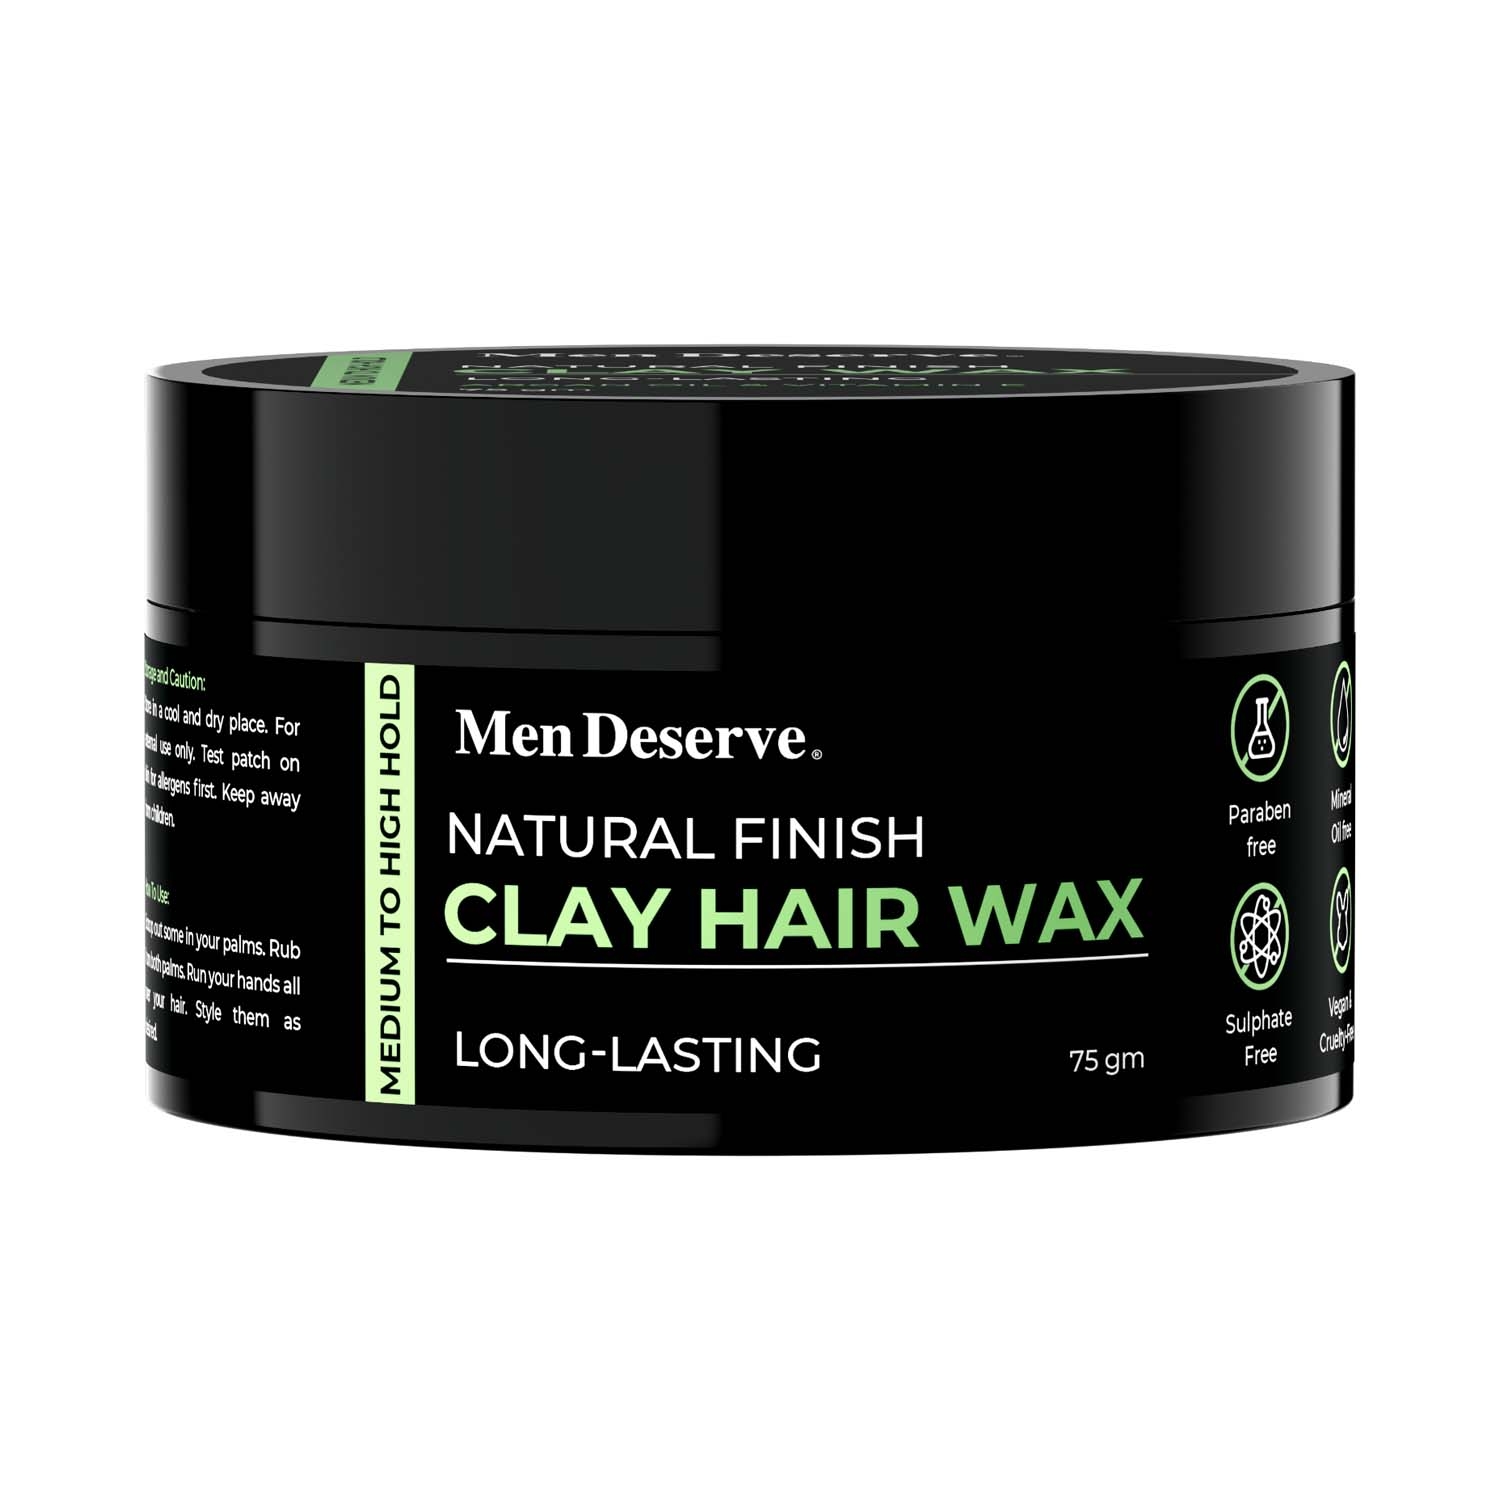 Men Deserve Hair Clay Wax For Natural Hair Styling (75g)